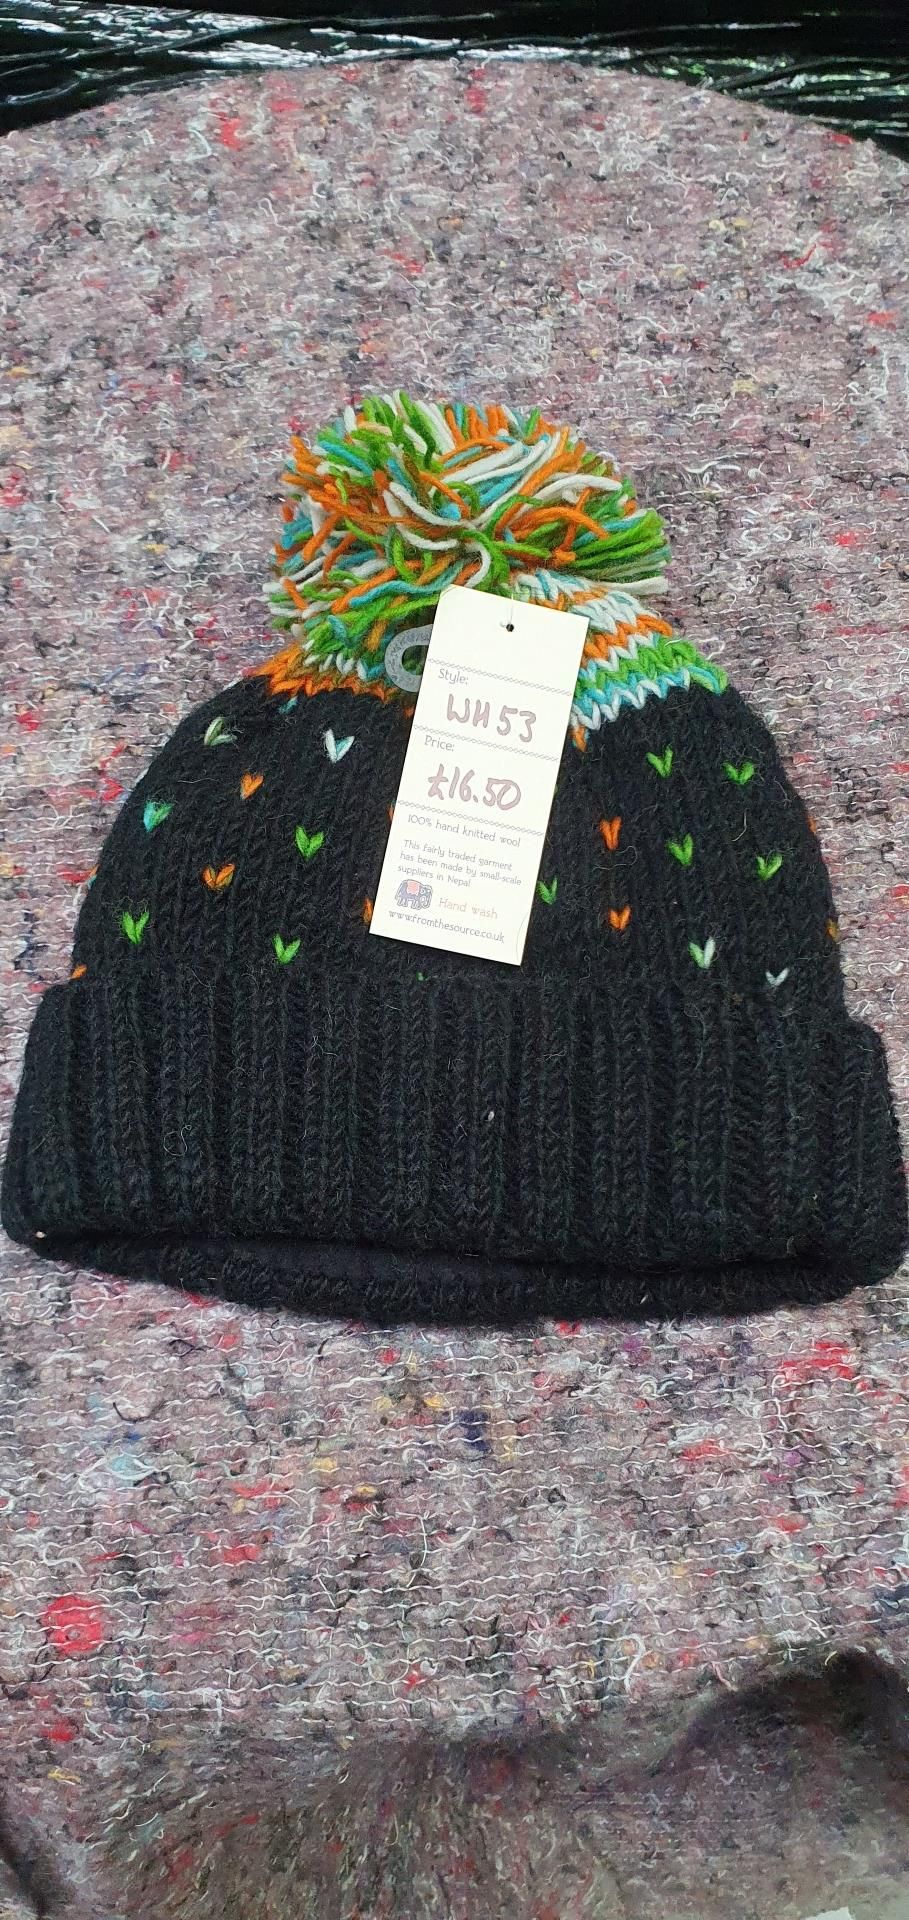 13 x Assorted Bobble Hats and Woolly Gloves by From The Source - New Stock - Ref: TCH236 - CL840 - - Image 13 of 24